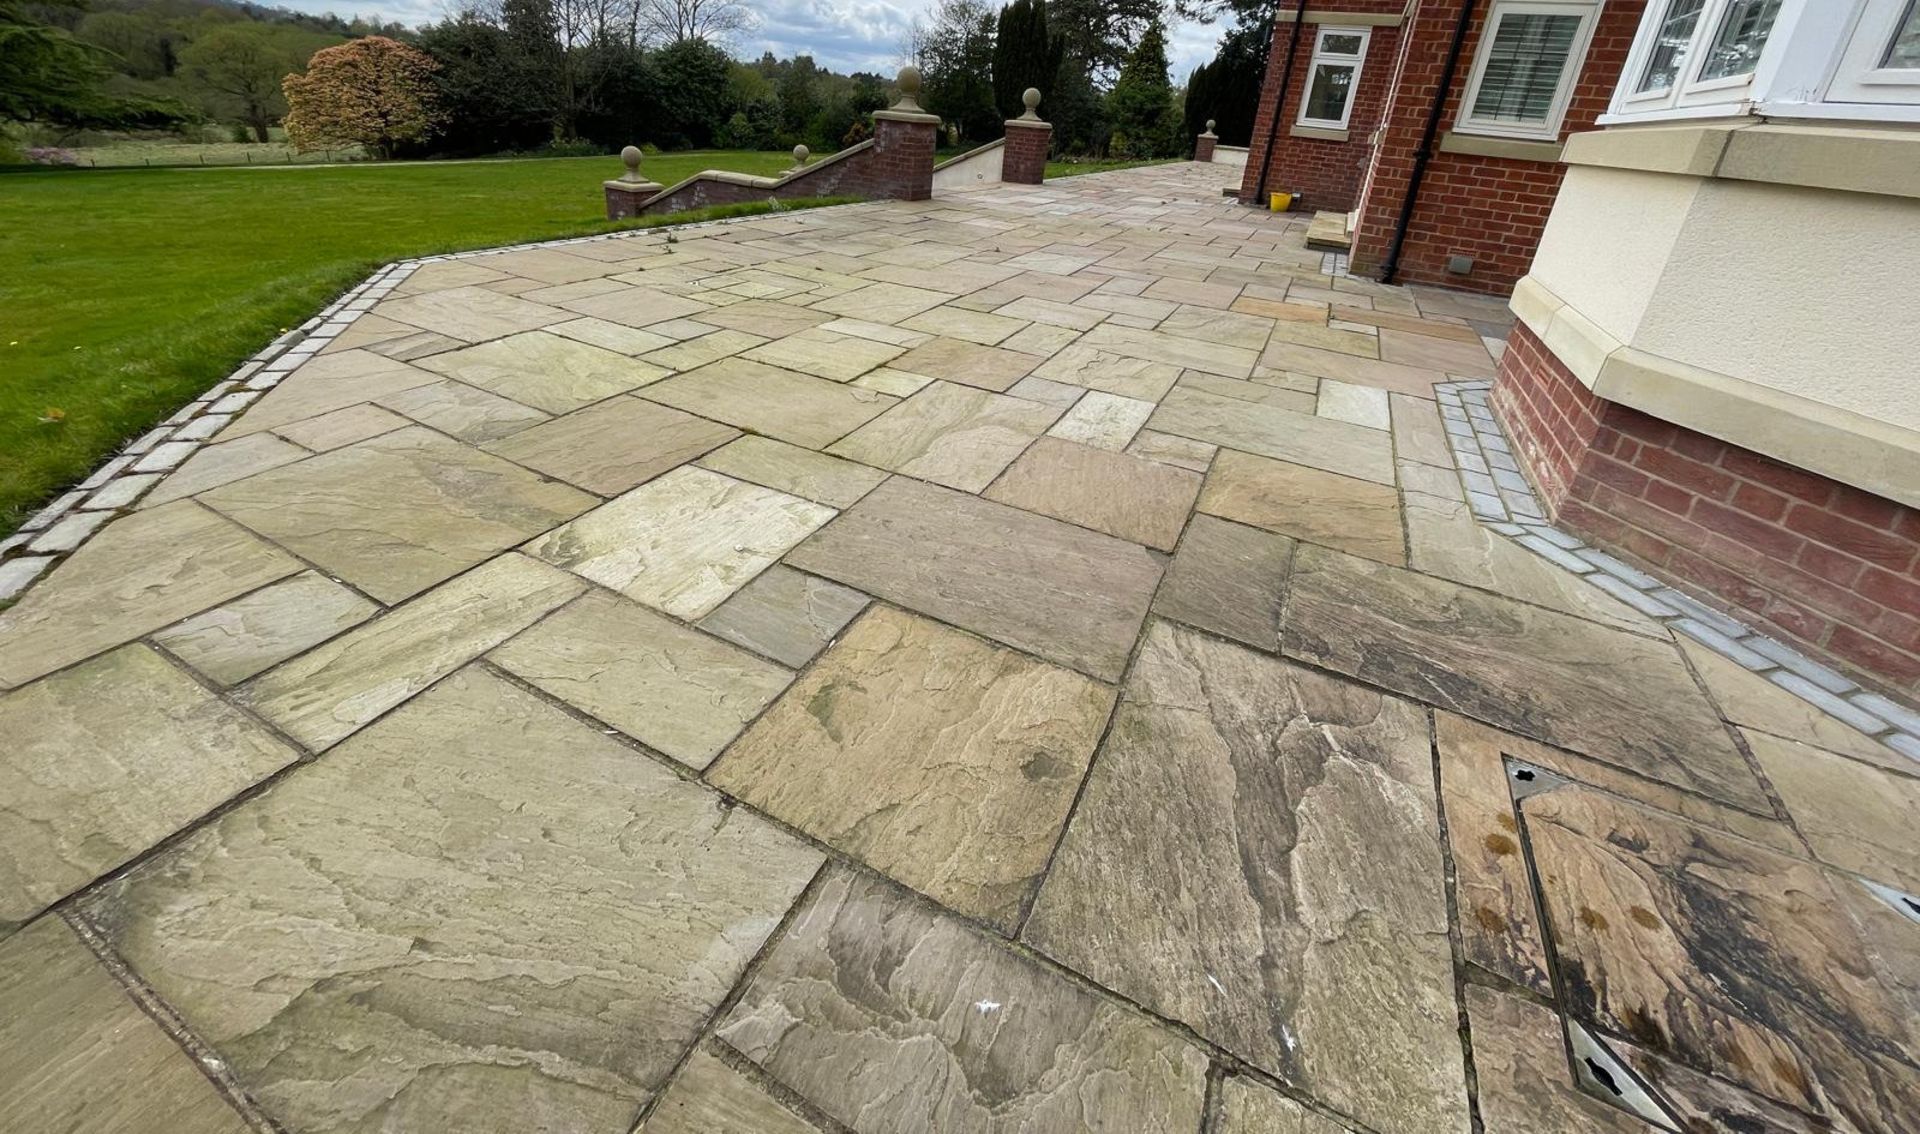 Large Quantity of Yorkstone Paving - Over 340sqm - CL896 - NO VAT ON THE HAMMER - Location: Wilmslow - Image 50 of 57